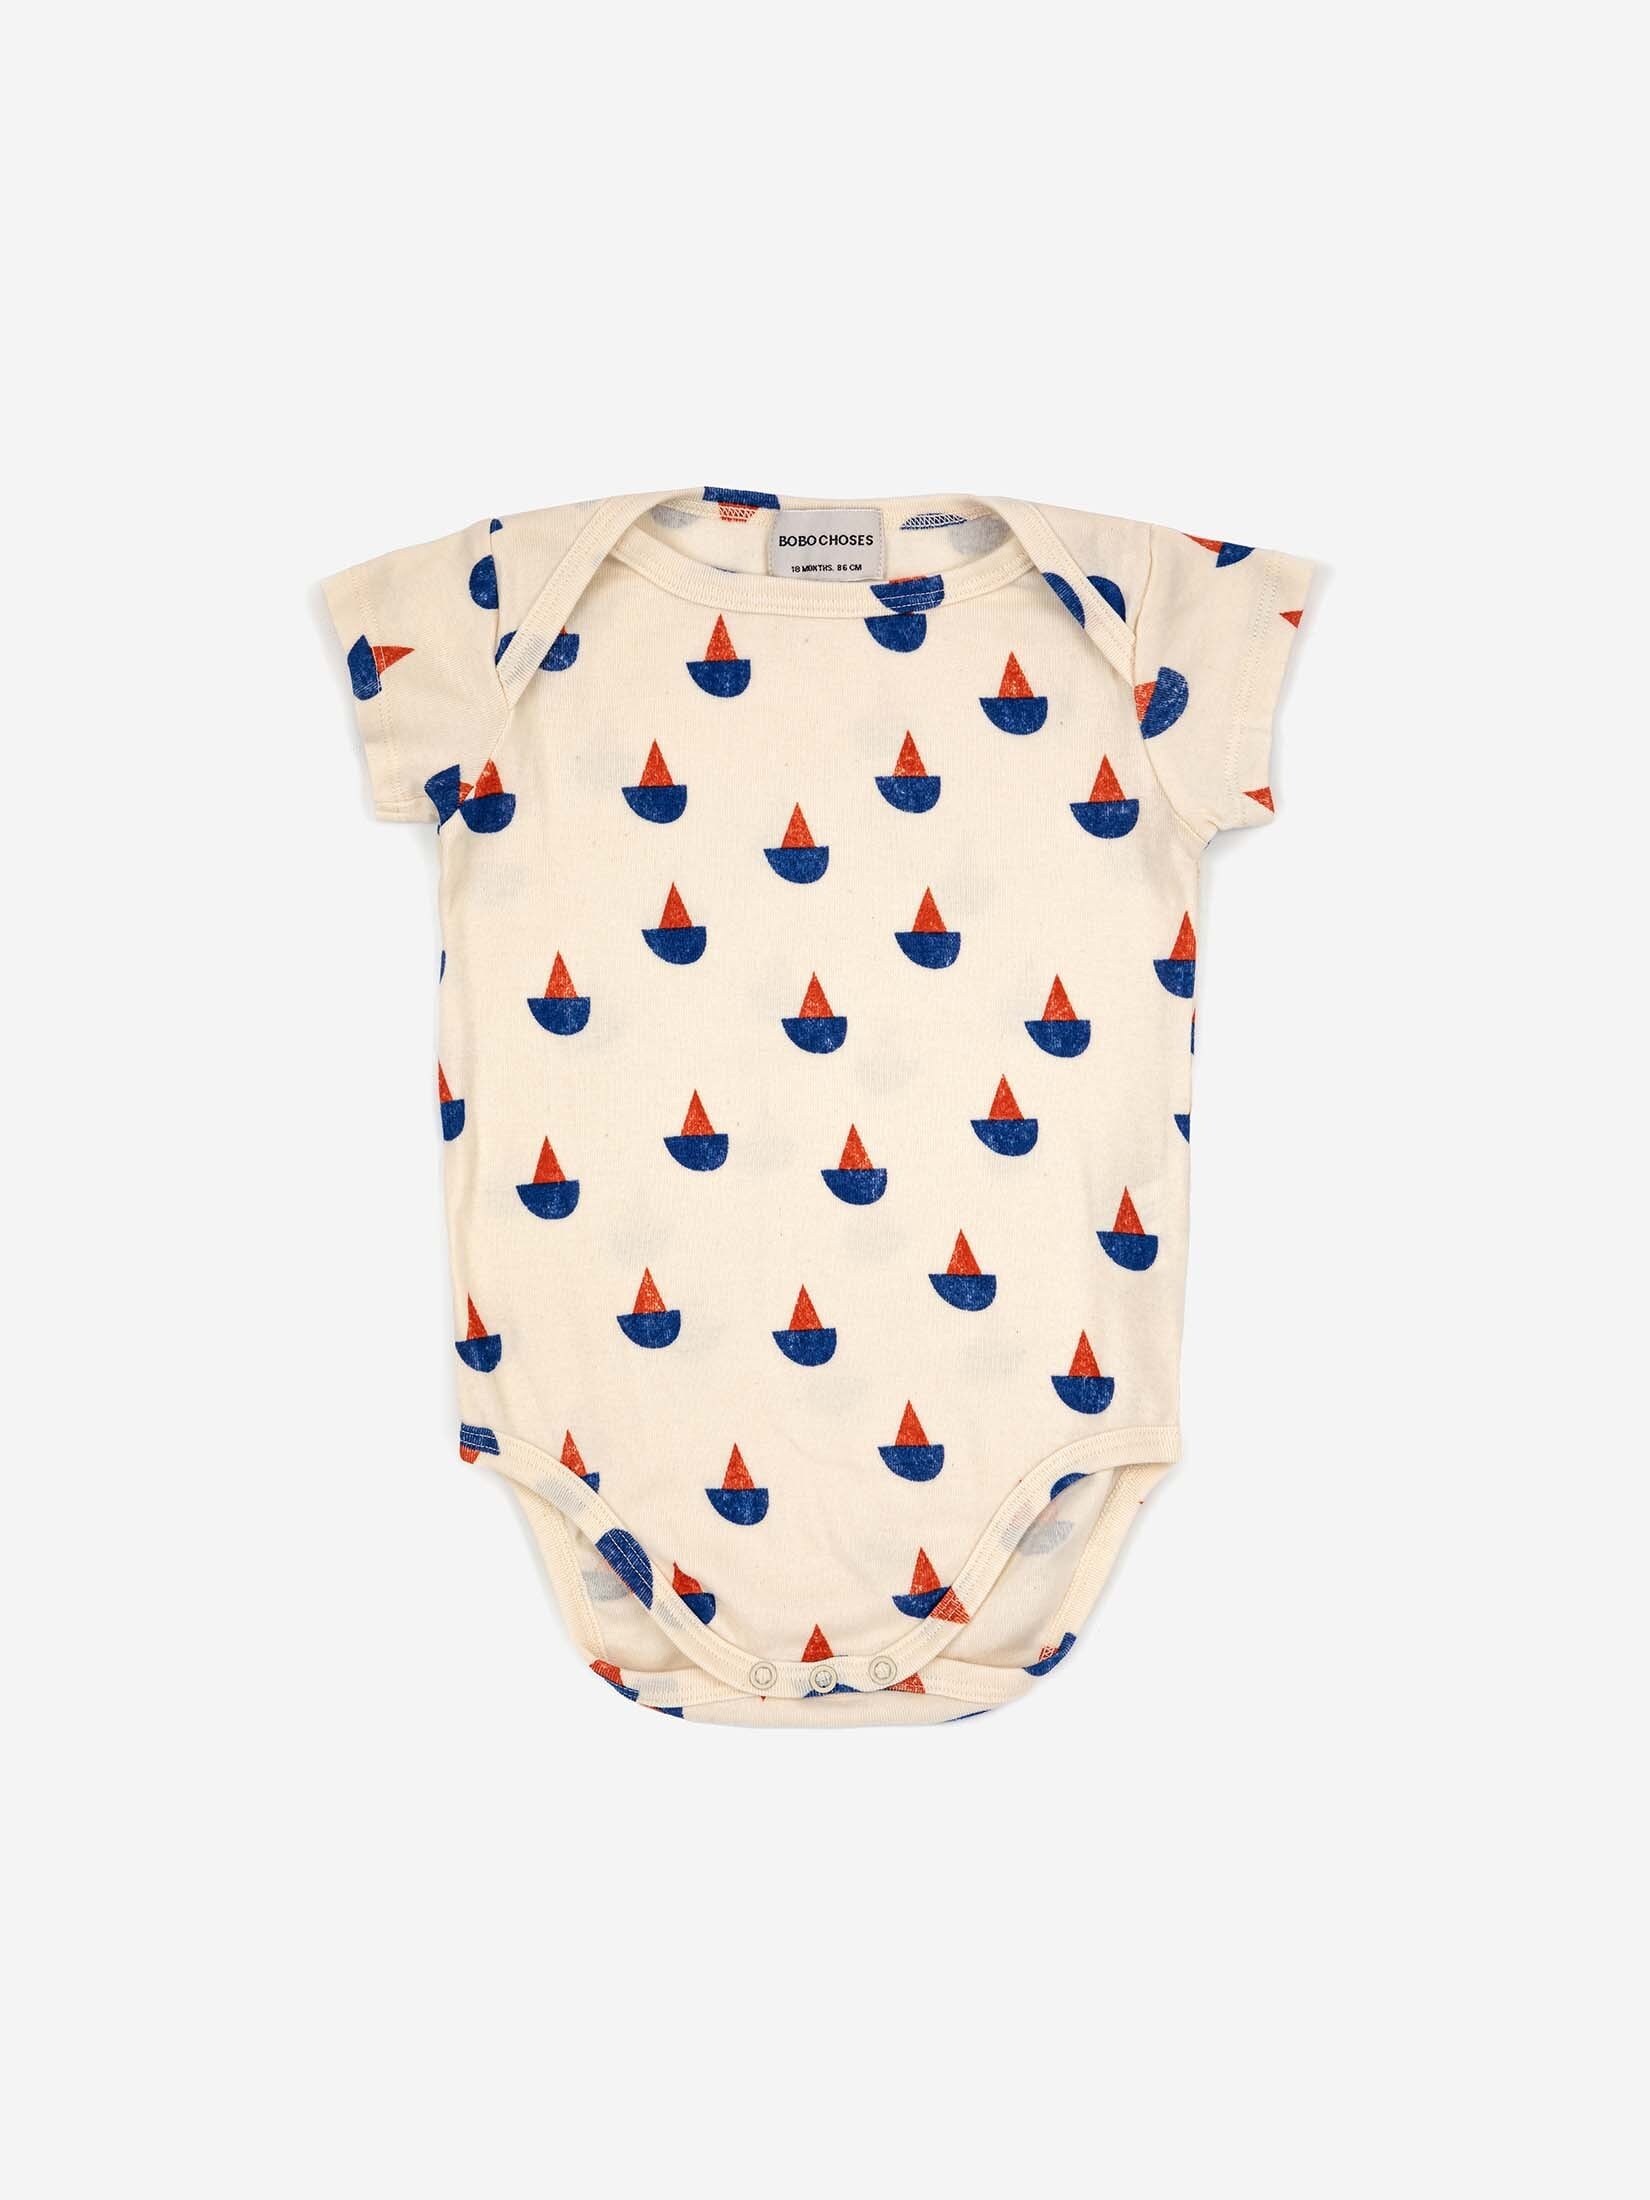 BOBO CHOSES / Sail boat all over short sleeve bodies set ...